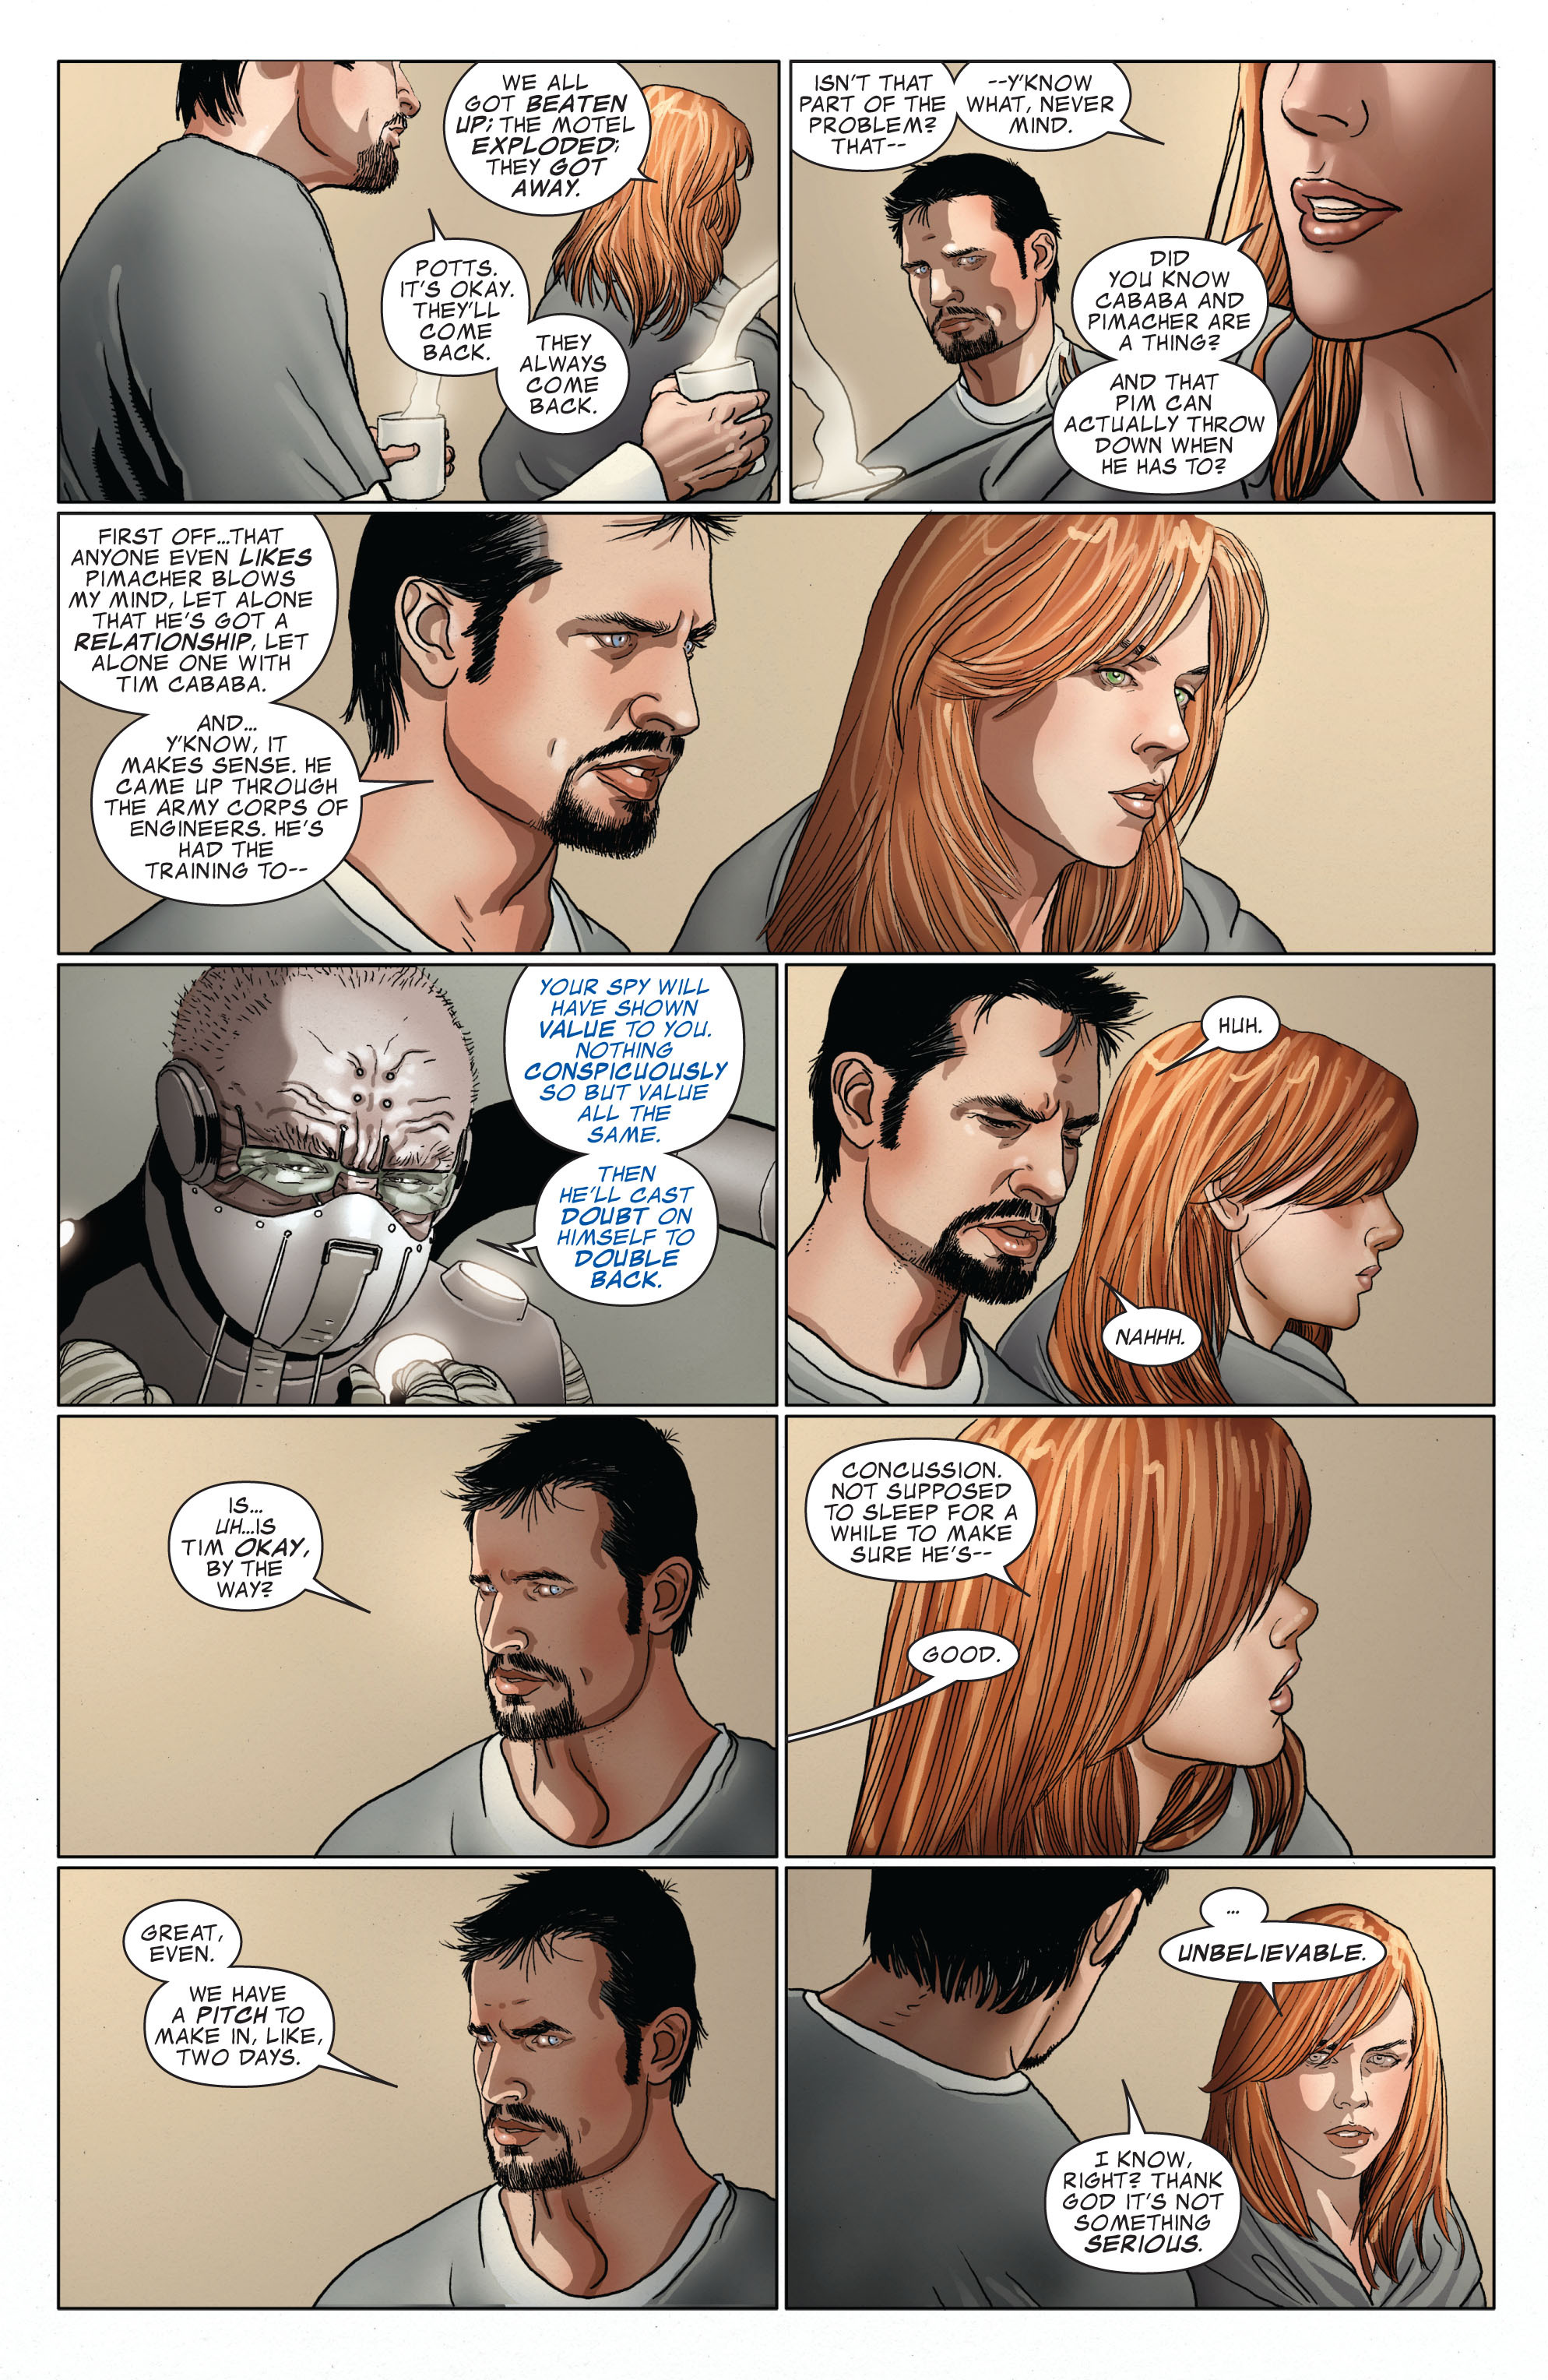 Invincible Iron Man (2008) 503 Page 16